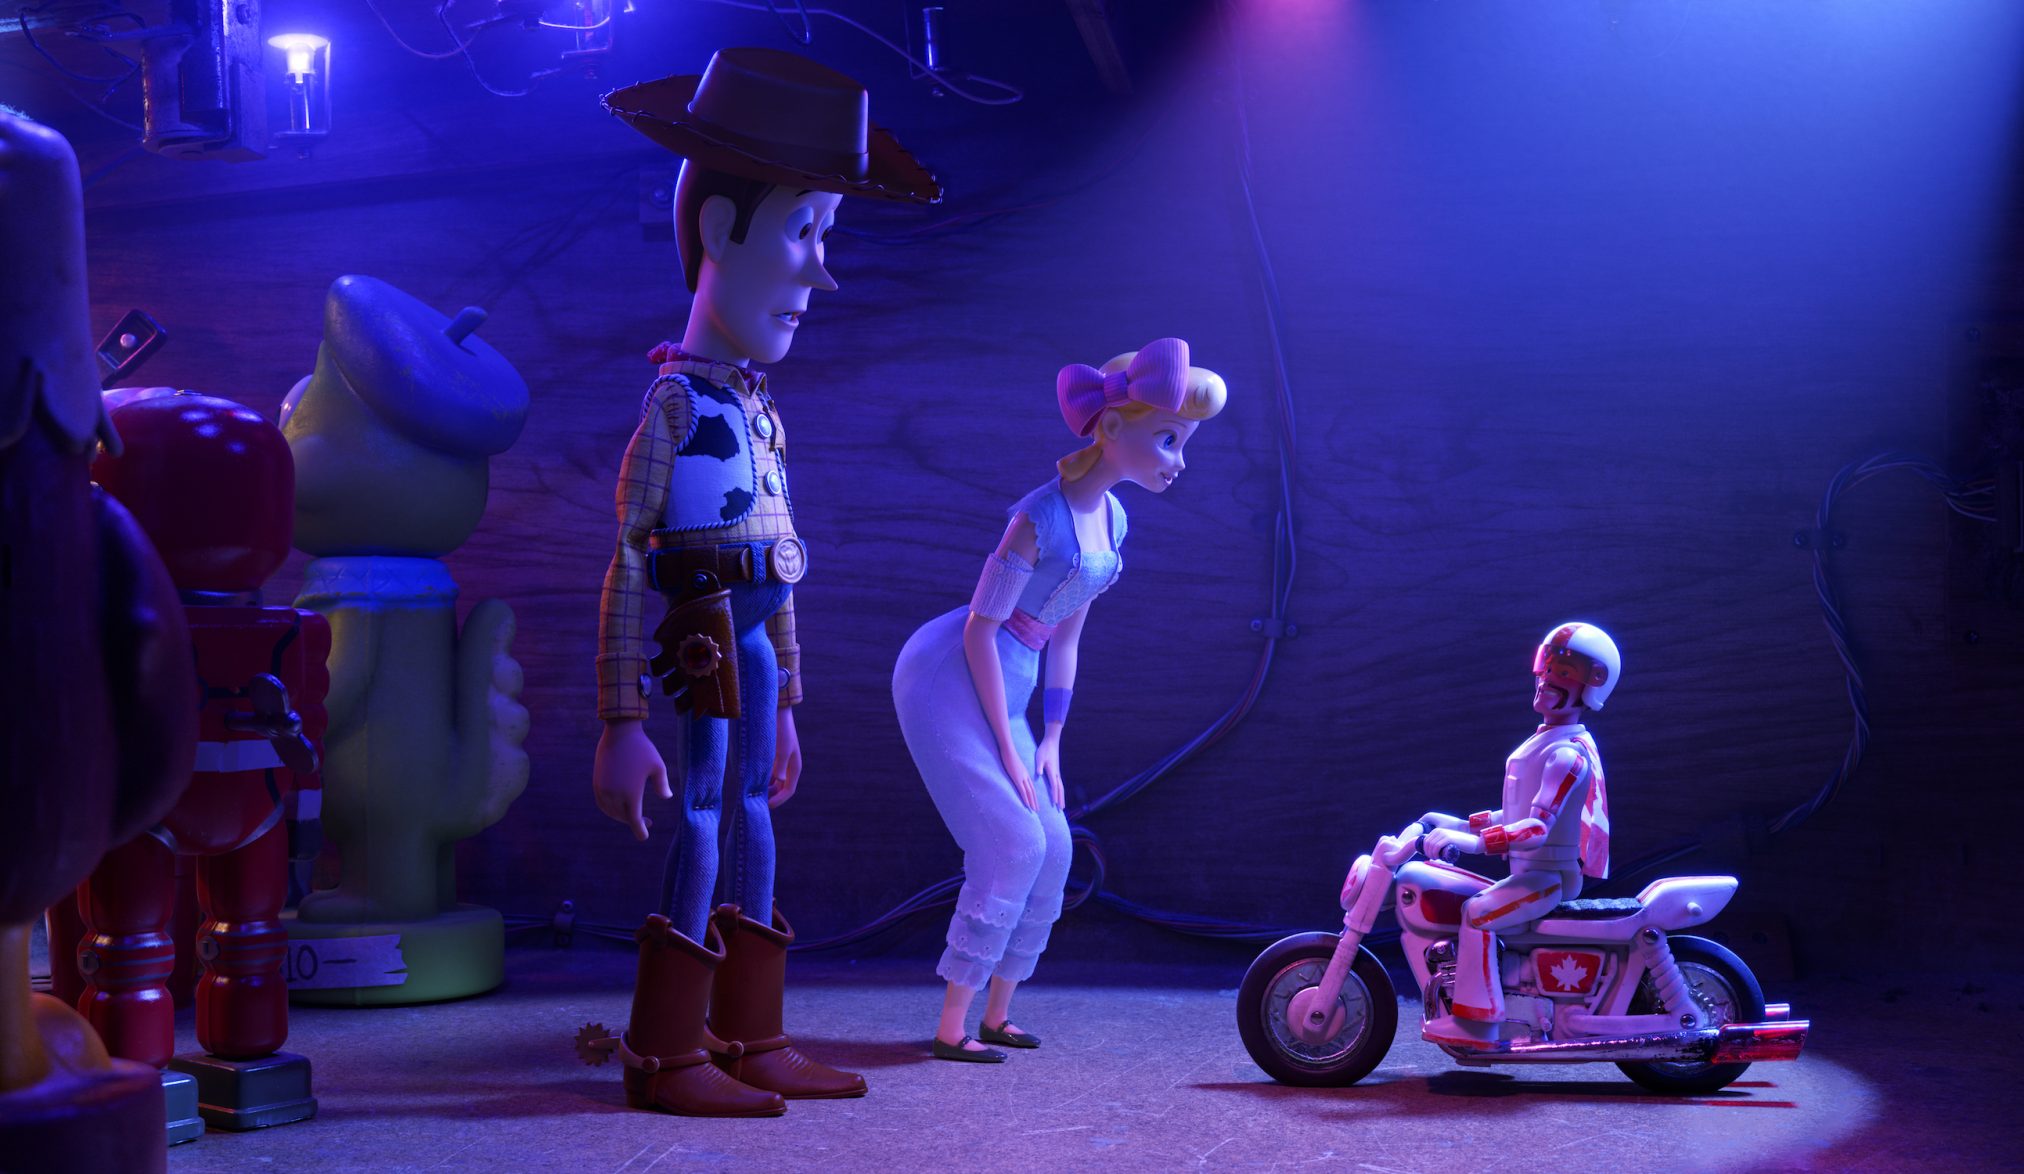 Don't Miss Toy Story 4 on Digital 10/1 and Blu-Ray 10/8! #ToyStory4